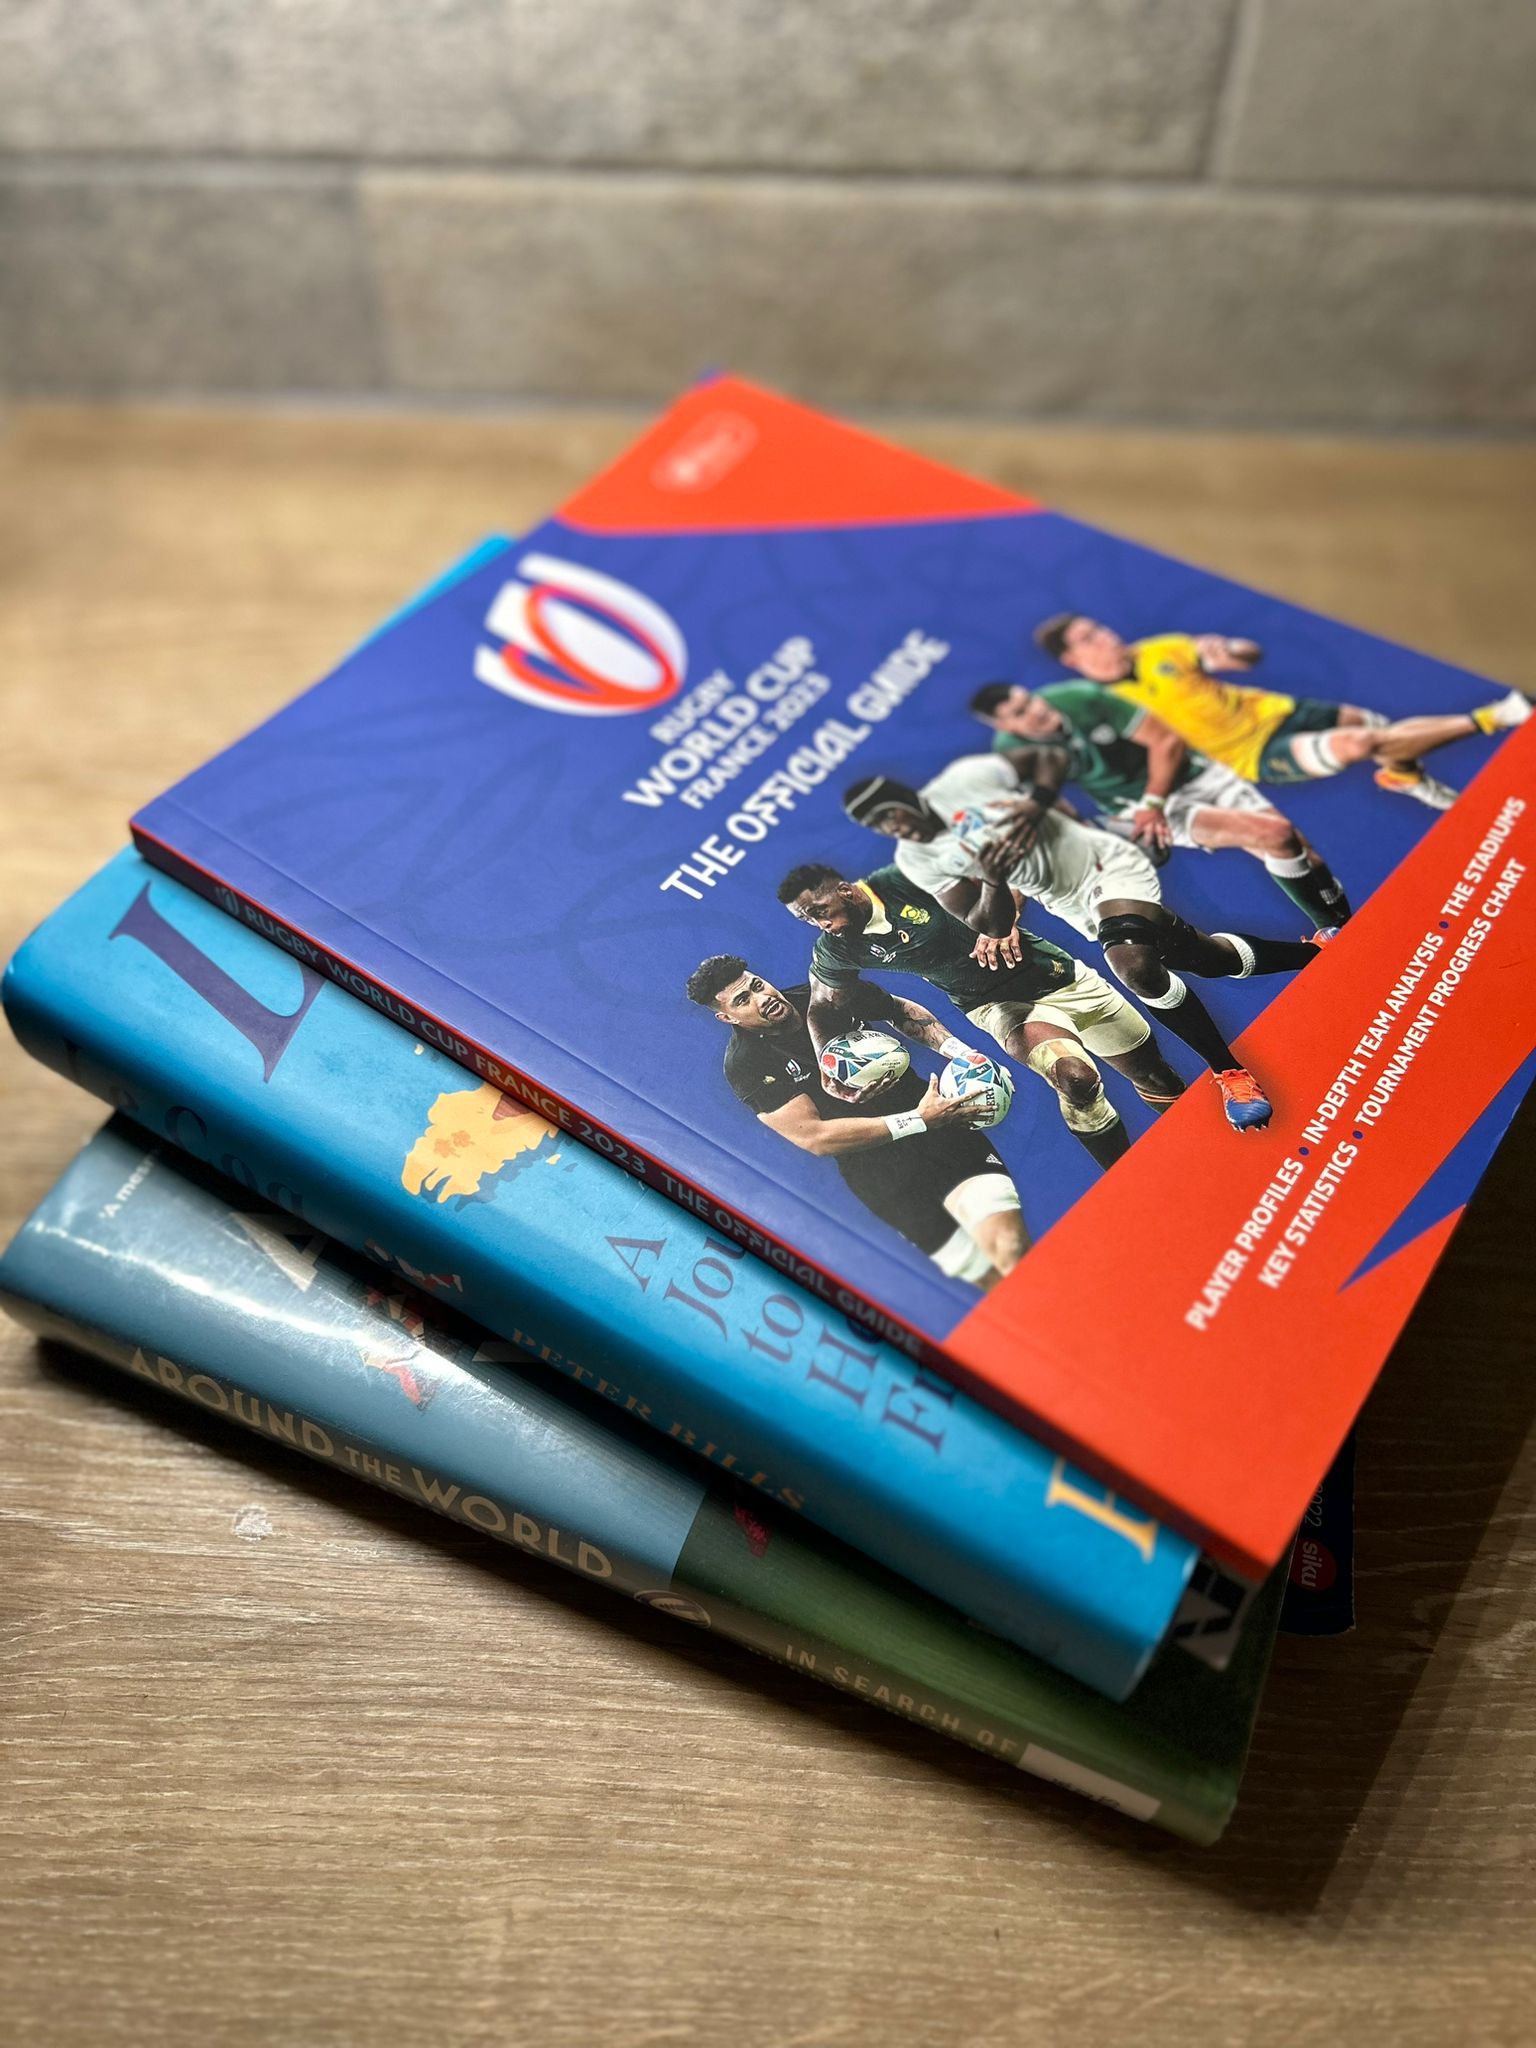 Rugby World Cup 2003 books